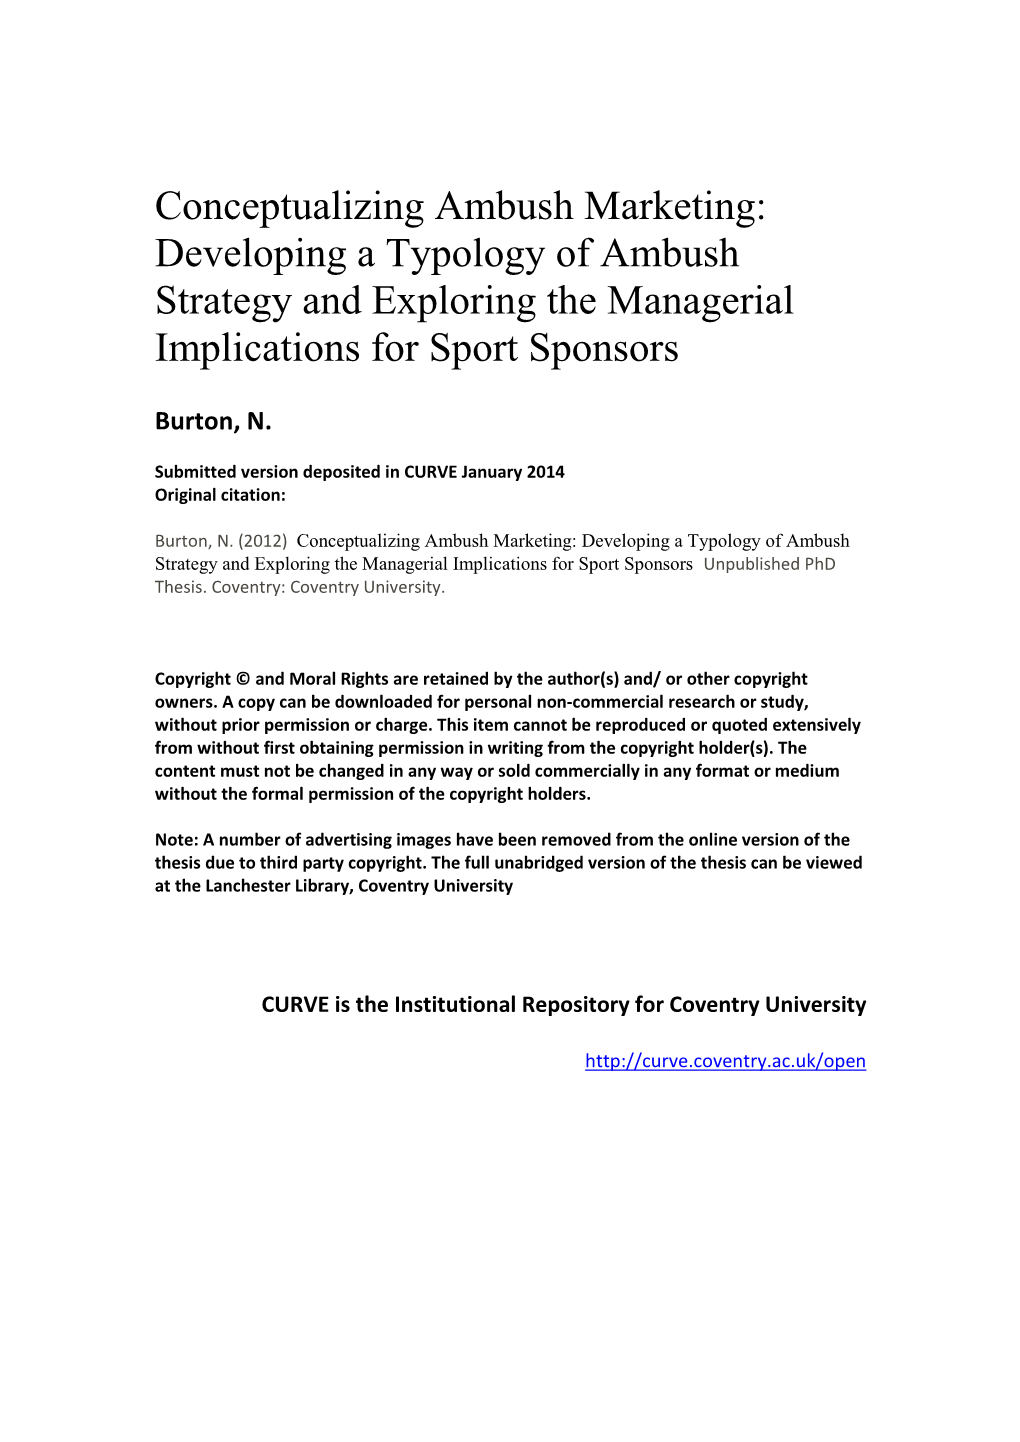 Conceptualizing Ambush Marketing: Developing a Typology of Ambush Strategy and Exploring the Managerial Implications for Sport Sponsors